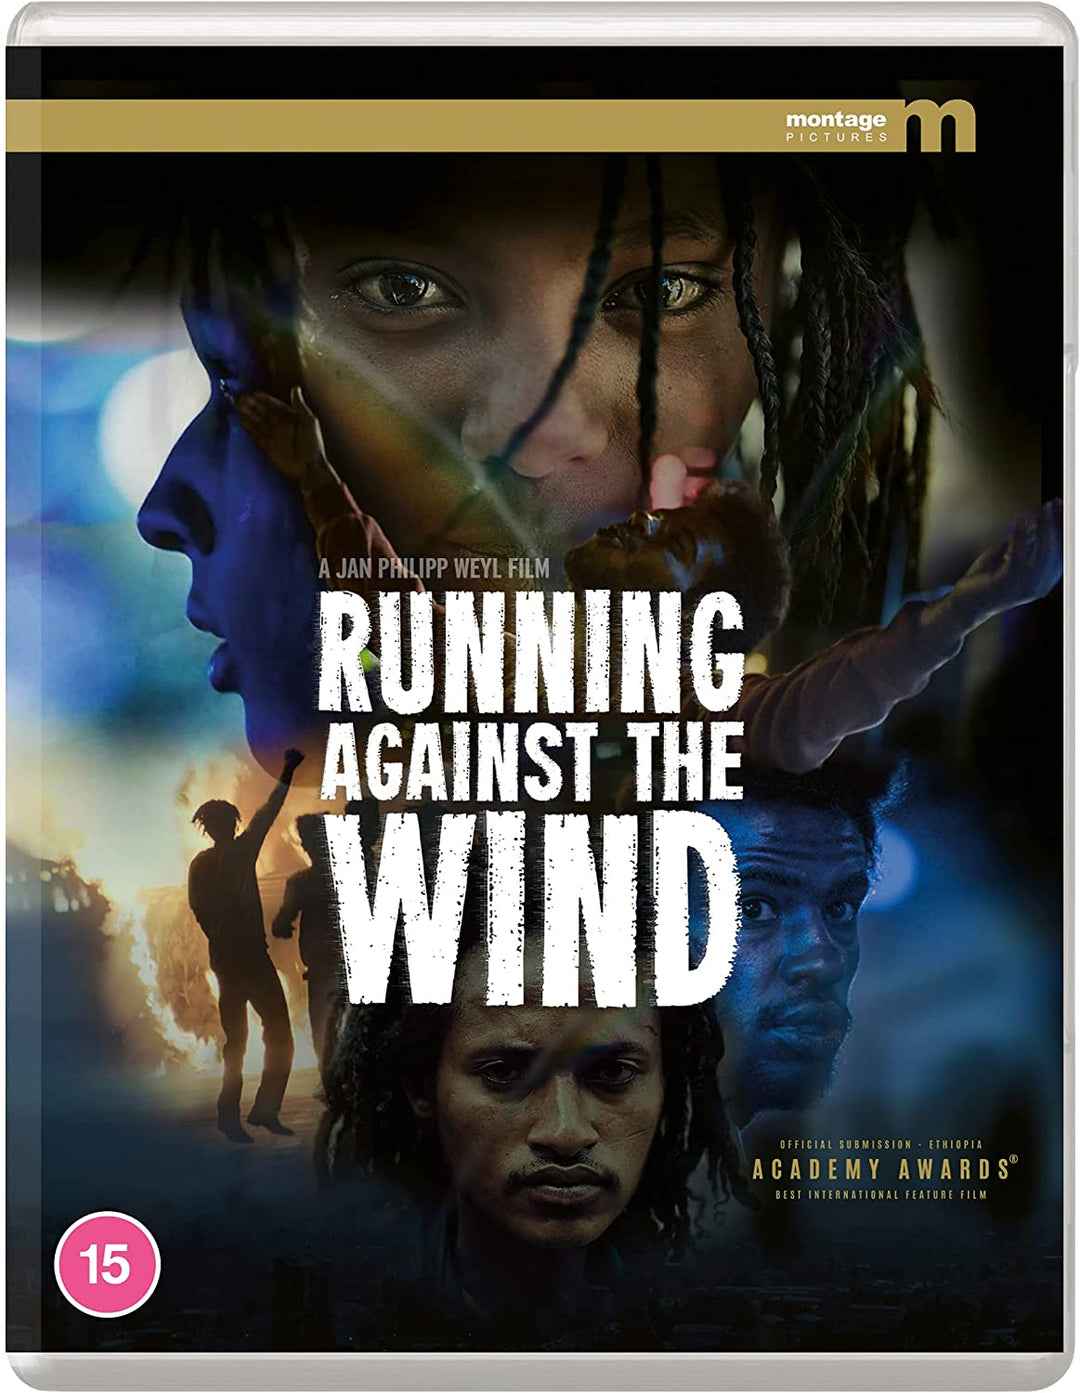 Running Against The Wind (Montage Pictures) - Drama [BLu-ray]